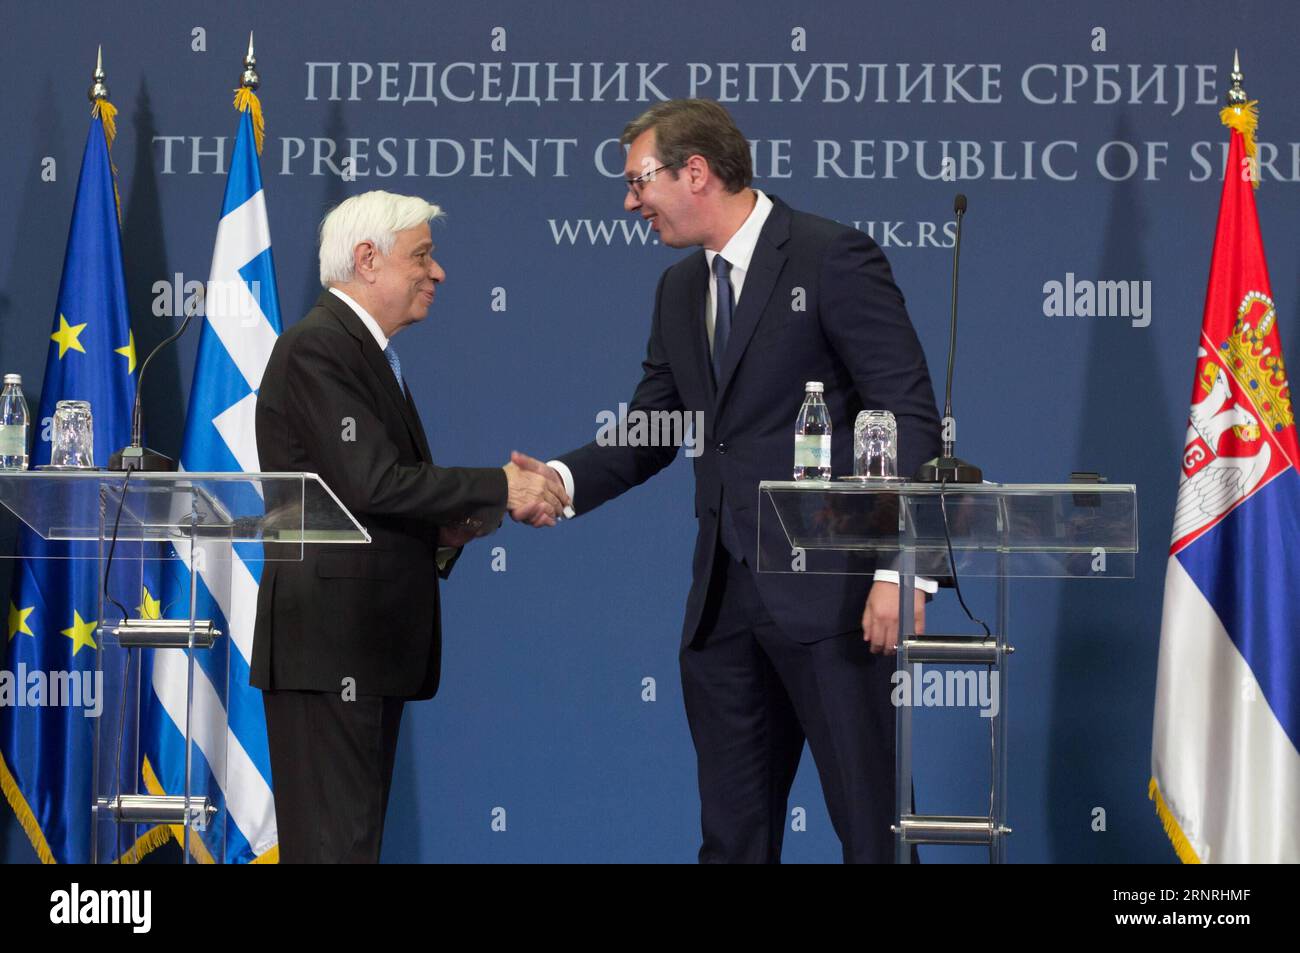 (171002) -- BELGRADE, Oct. 2, 2017 -- Visiting Greek President Prokopis Pavlopoulos (L) shakes hands with his Serbian counterpart Aleksandar Vucic at a joint press conference in Belgrade, Serbia, Oct. 2, 2017. Greece will support Serbia as well as all other Balkan countries who wish to become part of the European Union (EU), but these countries must respect international right, as well as European principles and heritage, said Greek President Prokopis Pavlopoulos during his visit to Serbia on Monday. ) SERBIA-BELGRADE-GREECE-PRESIDENT-VISIT NemanjaxCabric PUBLICATIONxNOTxINxCHN Stock Photo